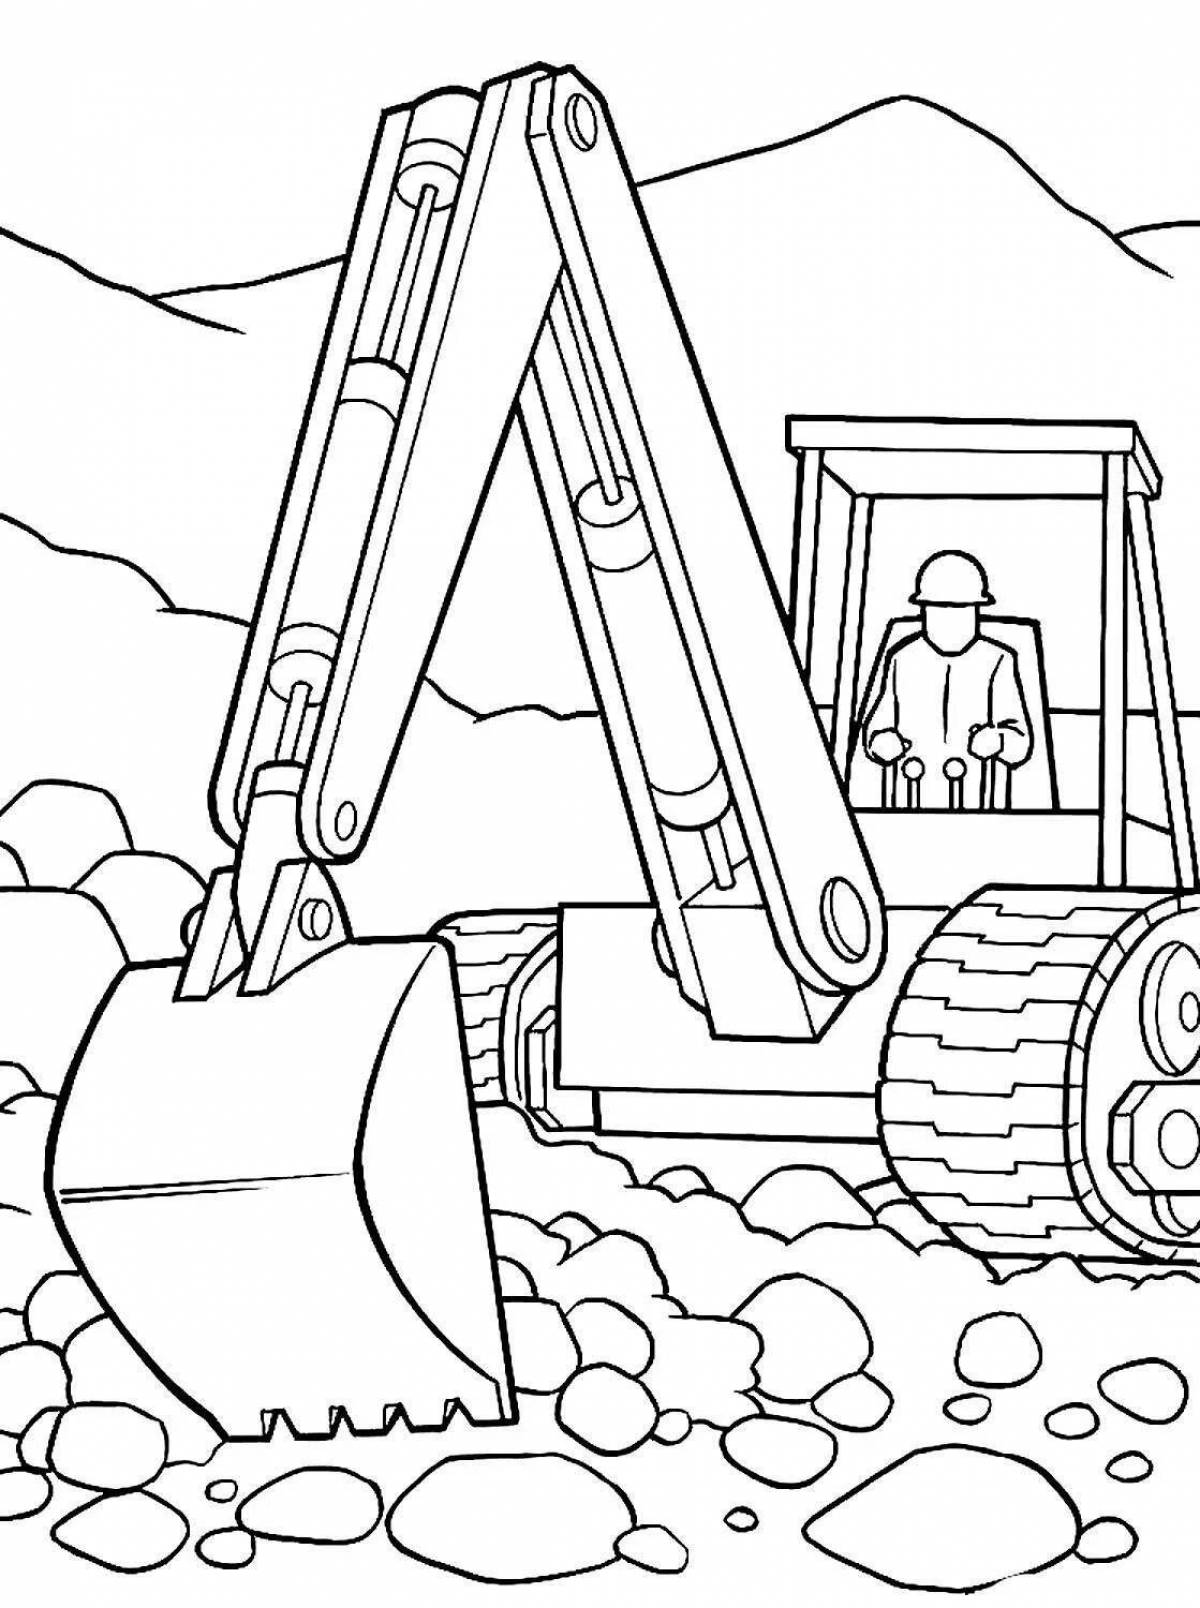 Fun coloring of construction vehicles for boys